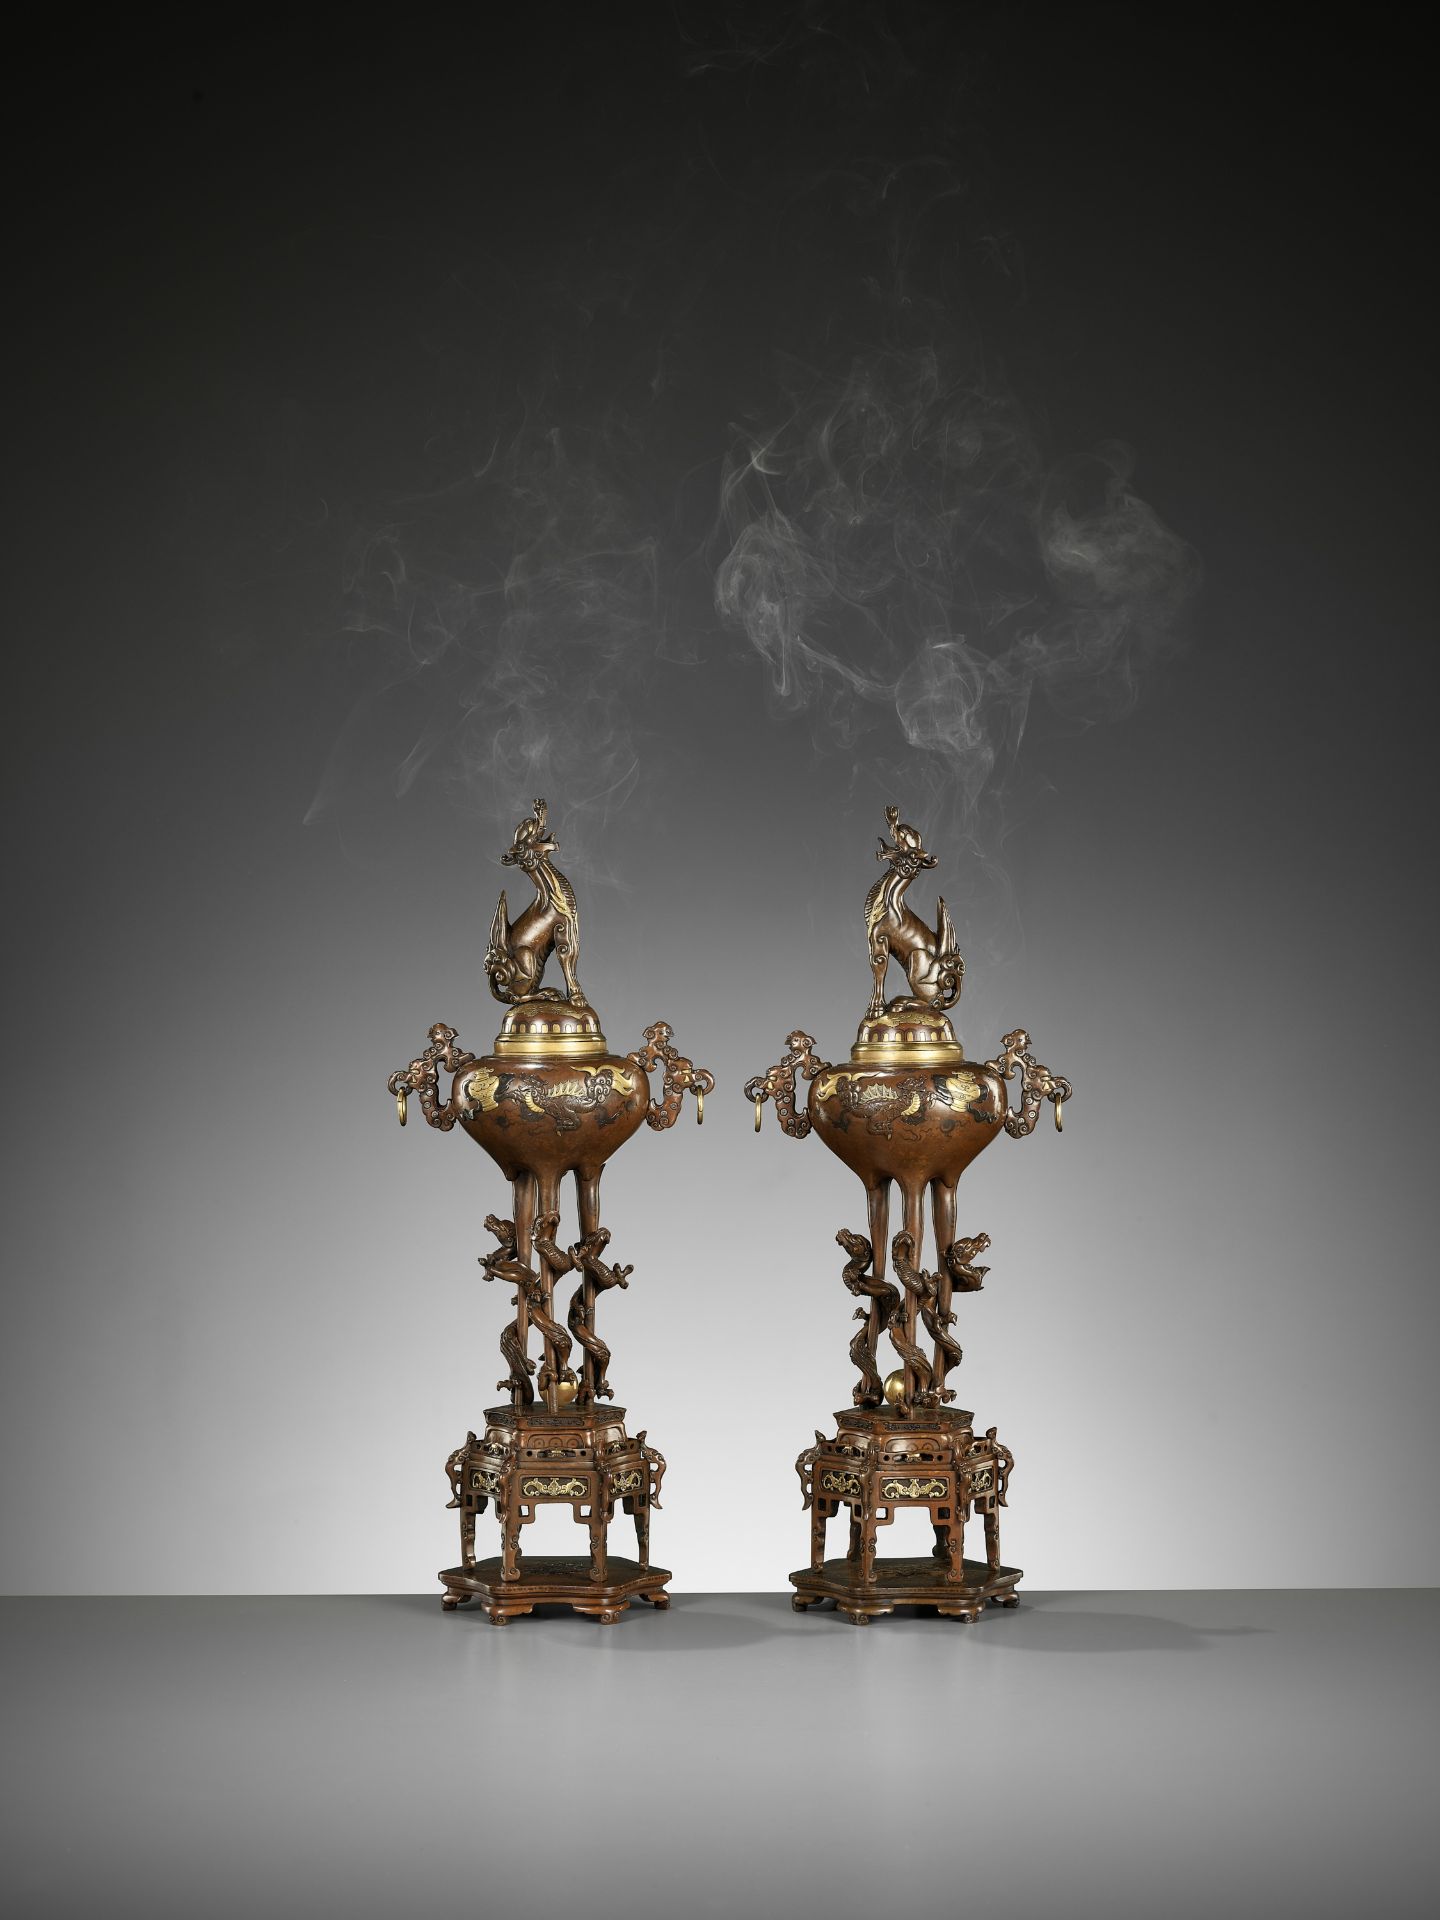 A PAIR OF SUPERB GOLD-INLAID BRONZE 'MYTHICAL BEASTS' KORO (INCENSE BURNERS) AND COVERS - Image 16 of 20